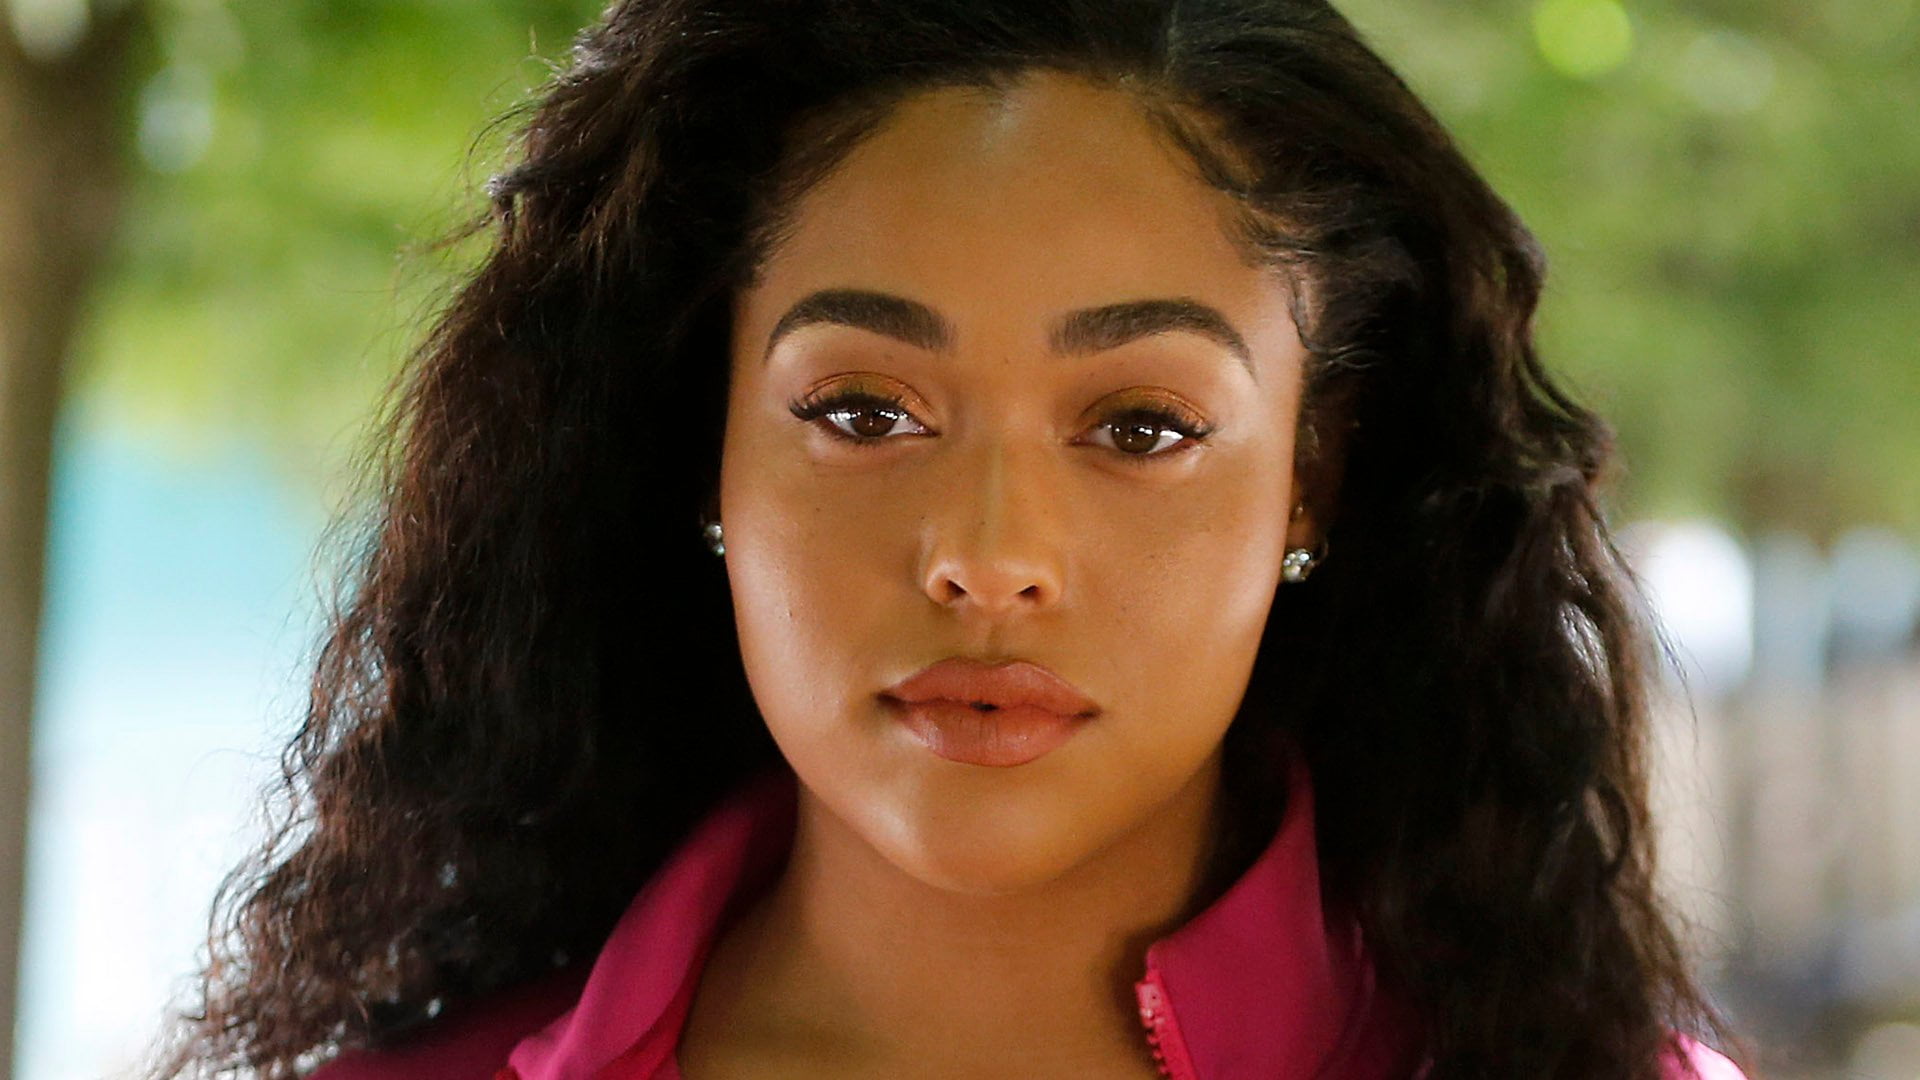 Jordyn Woods Looks Gorgeous In Her Latest Pics - Check Them Out Here